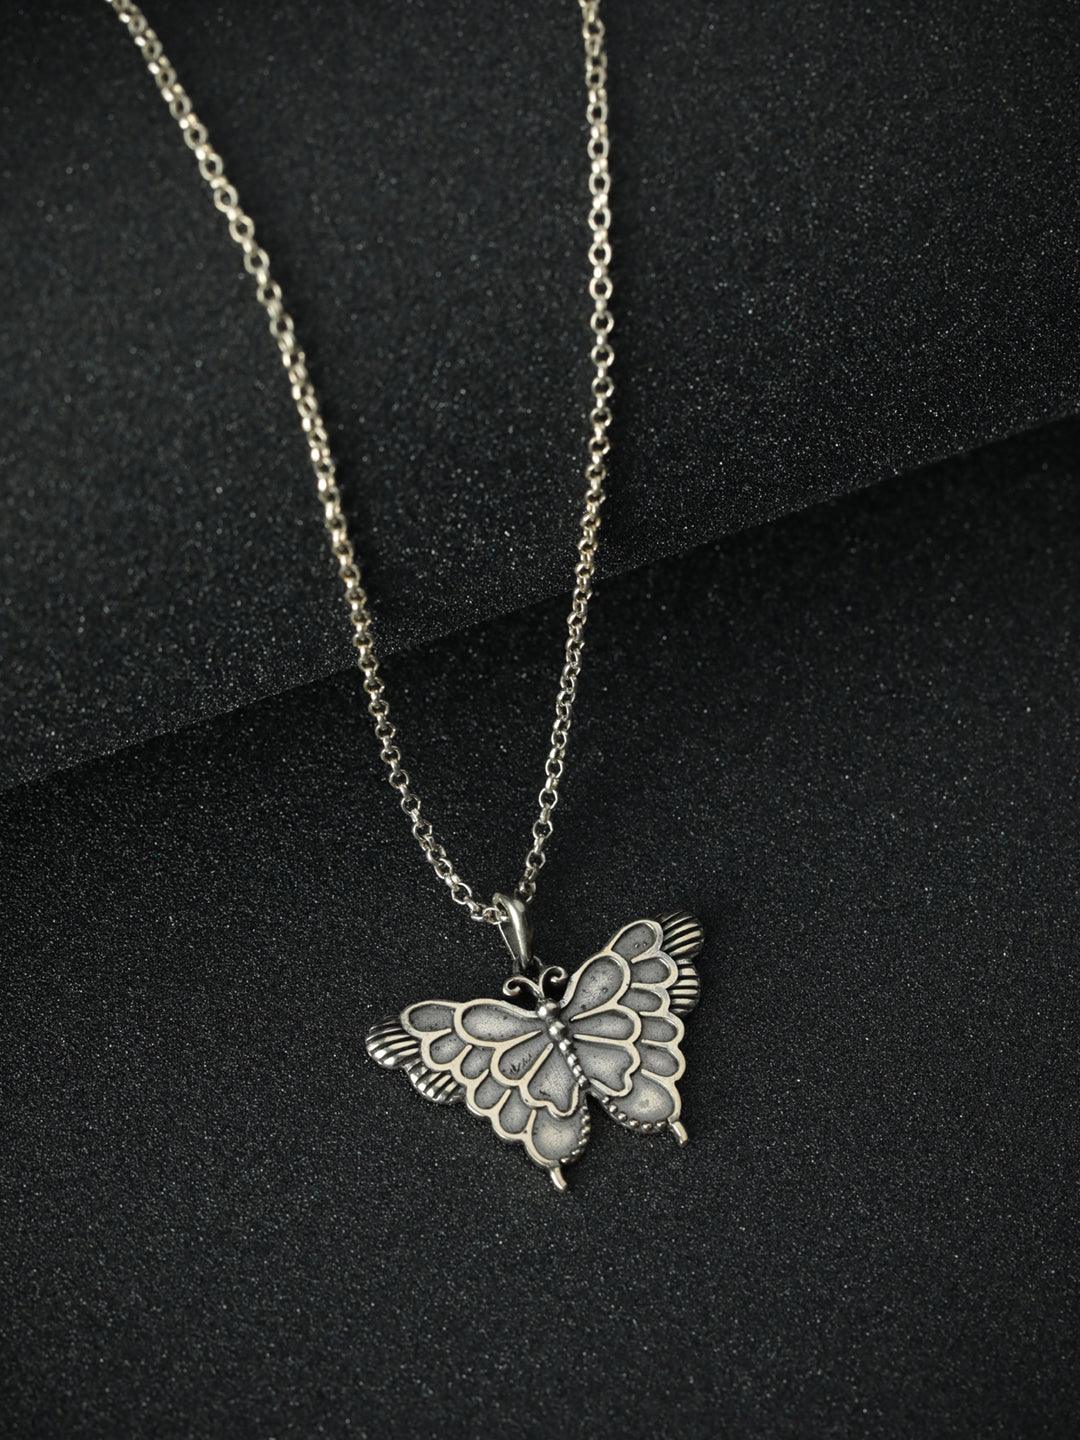 Women's Oxidised Silver Butterfly Pendant Necklace - Priyaasi - Indiakreations